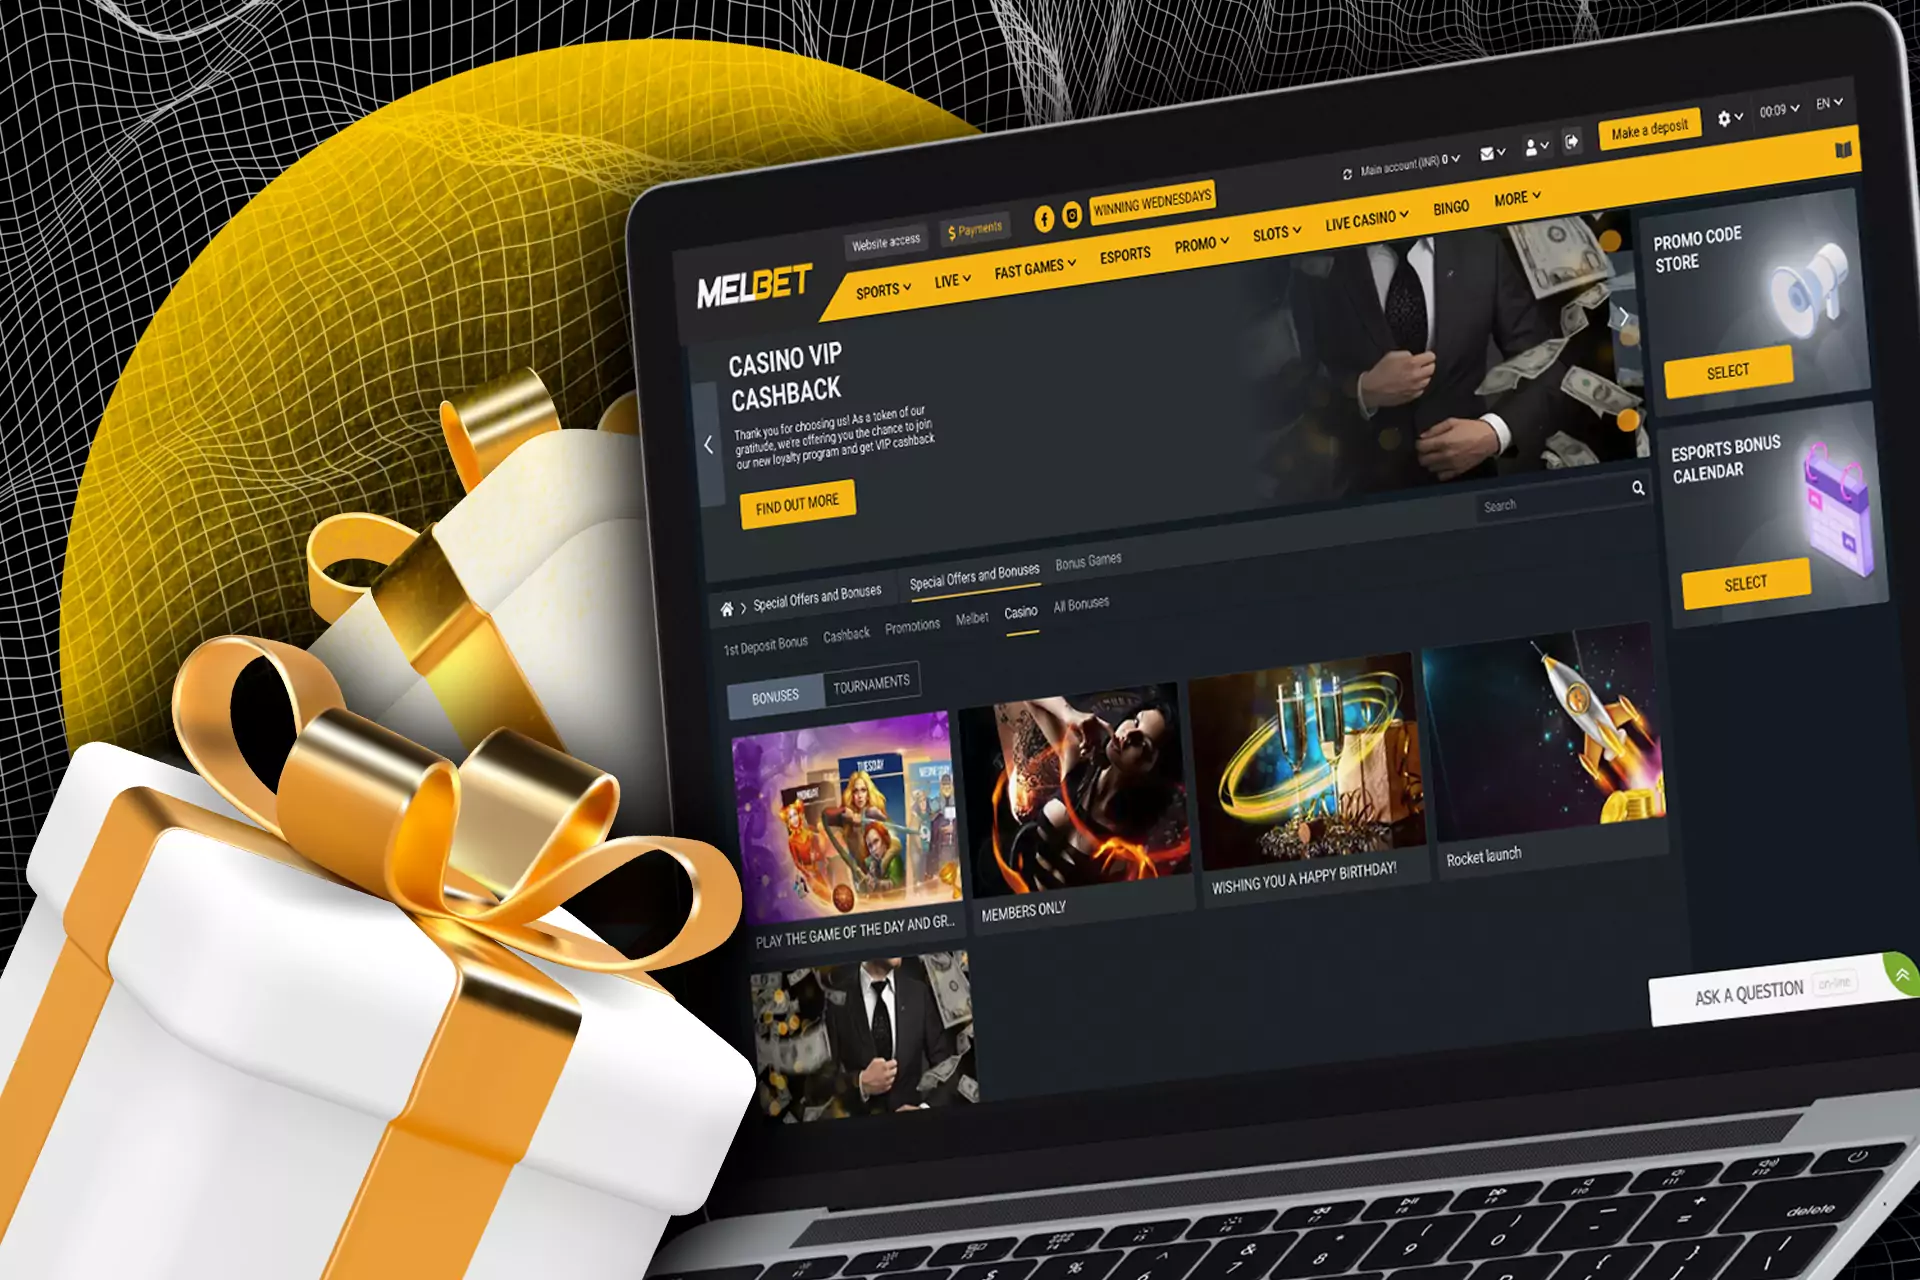 For new and old users there are lots of bonus offers at Melbet.